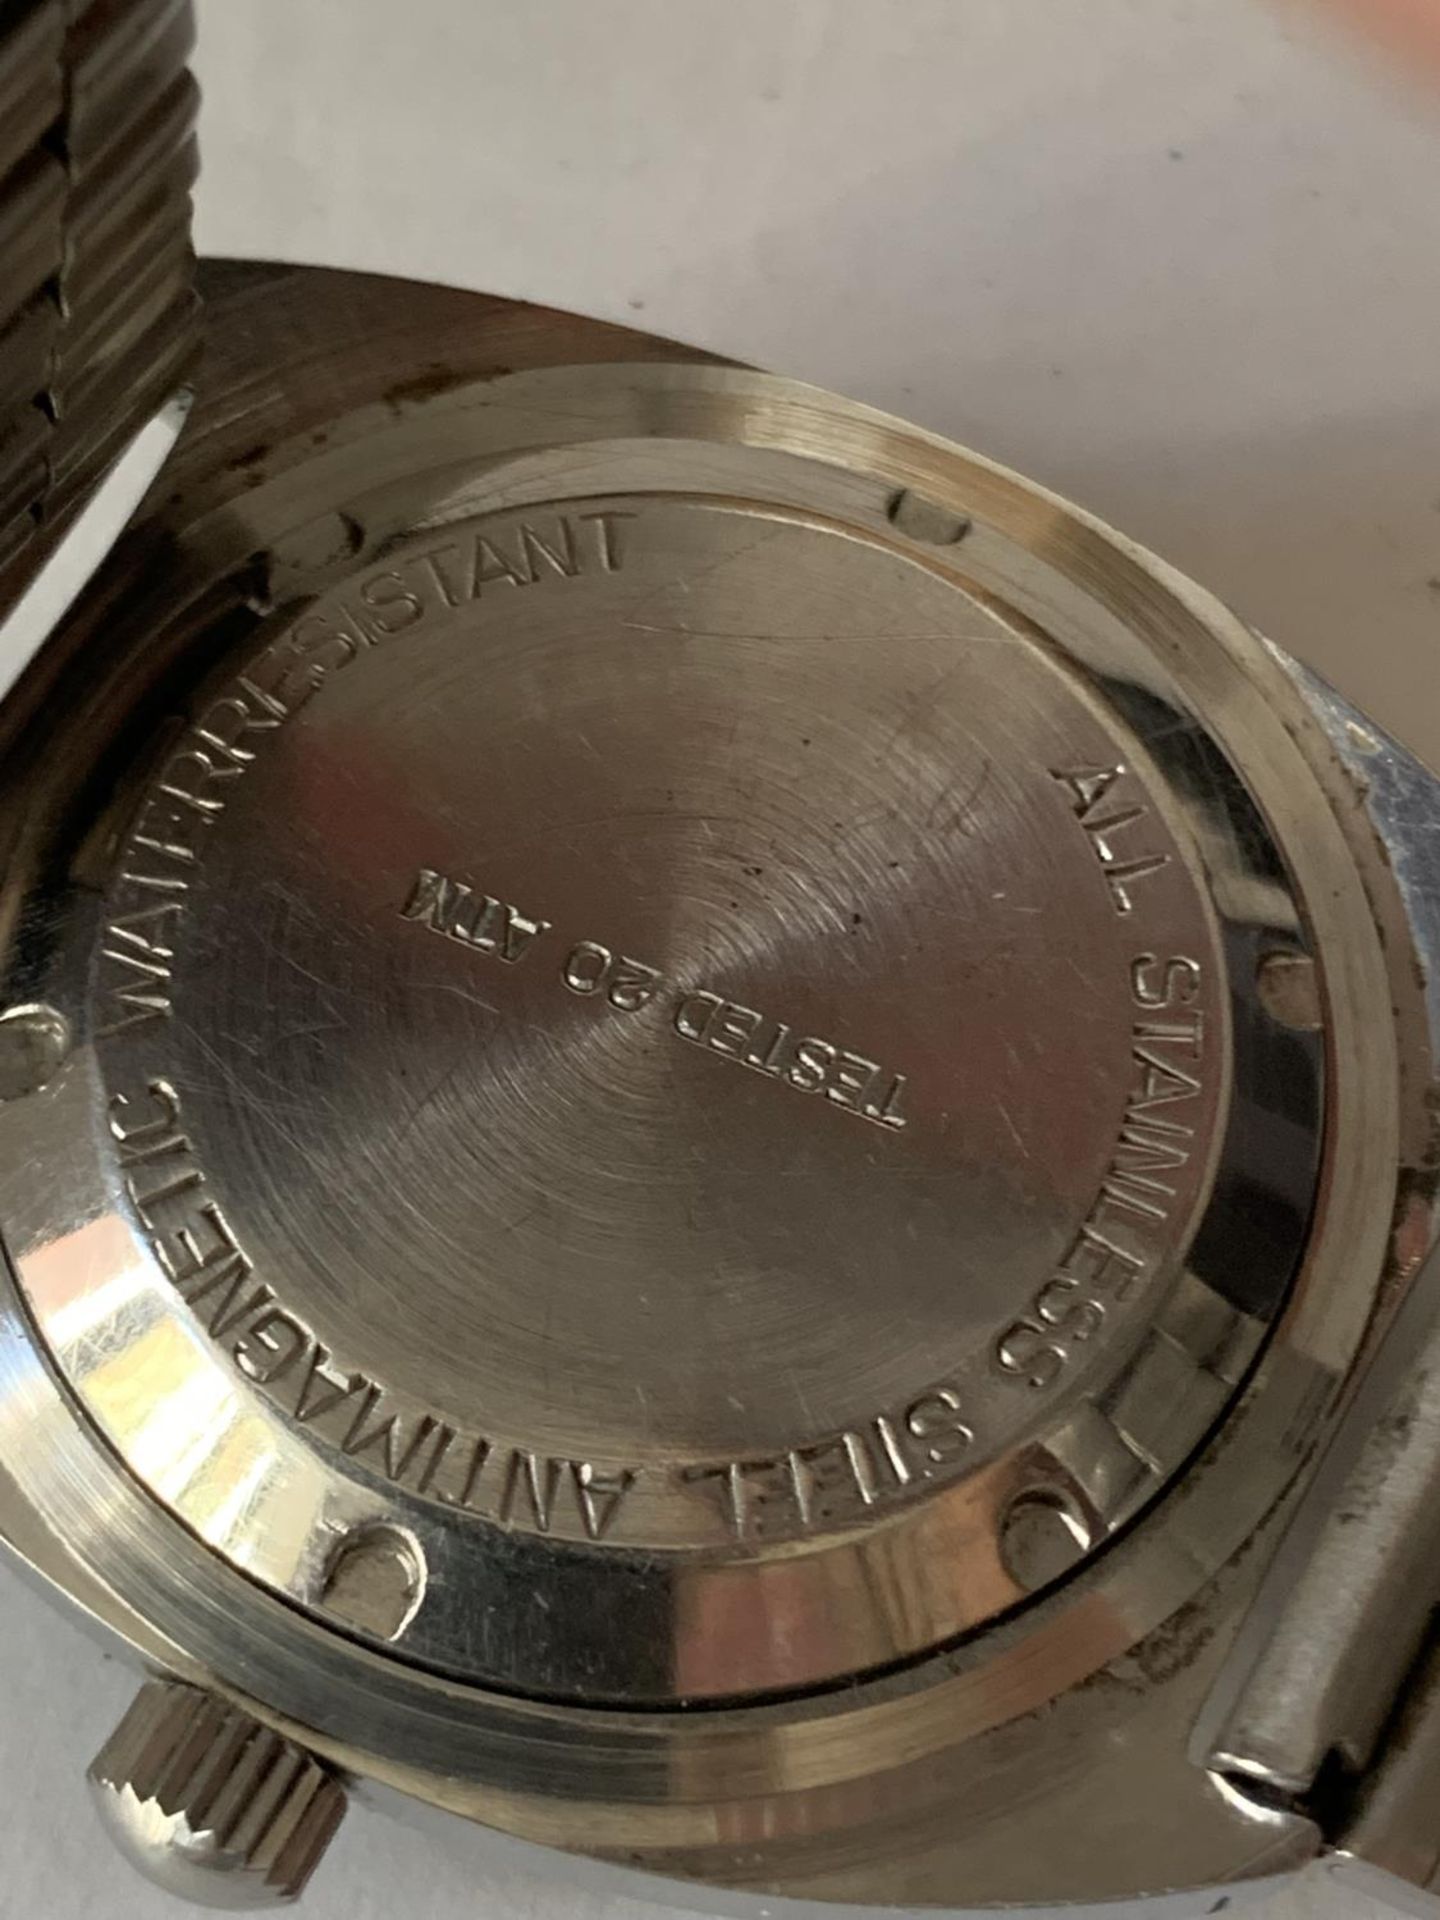 A RARE MISTAS AUTOMATIC 25 JEWELS DIVERS WATCH 200M. SEEN WORKING BUT NO WARRANTY - Image 3 of 3